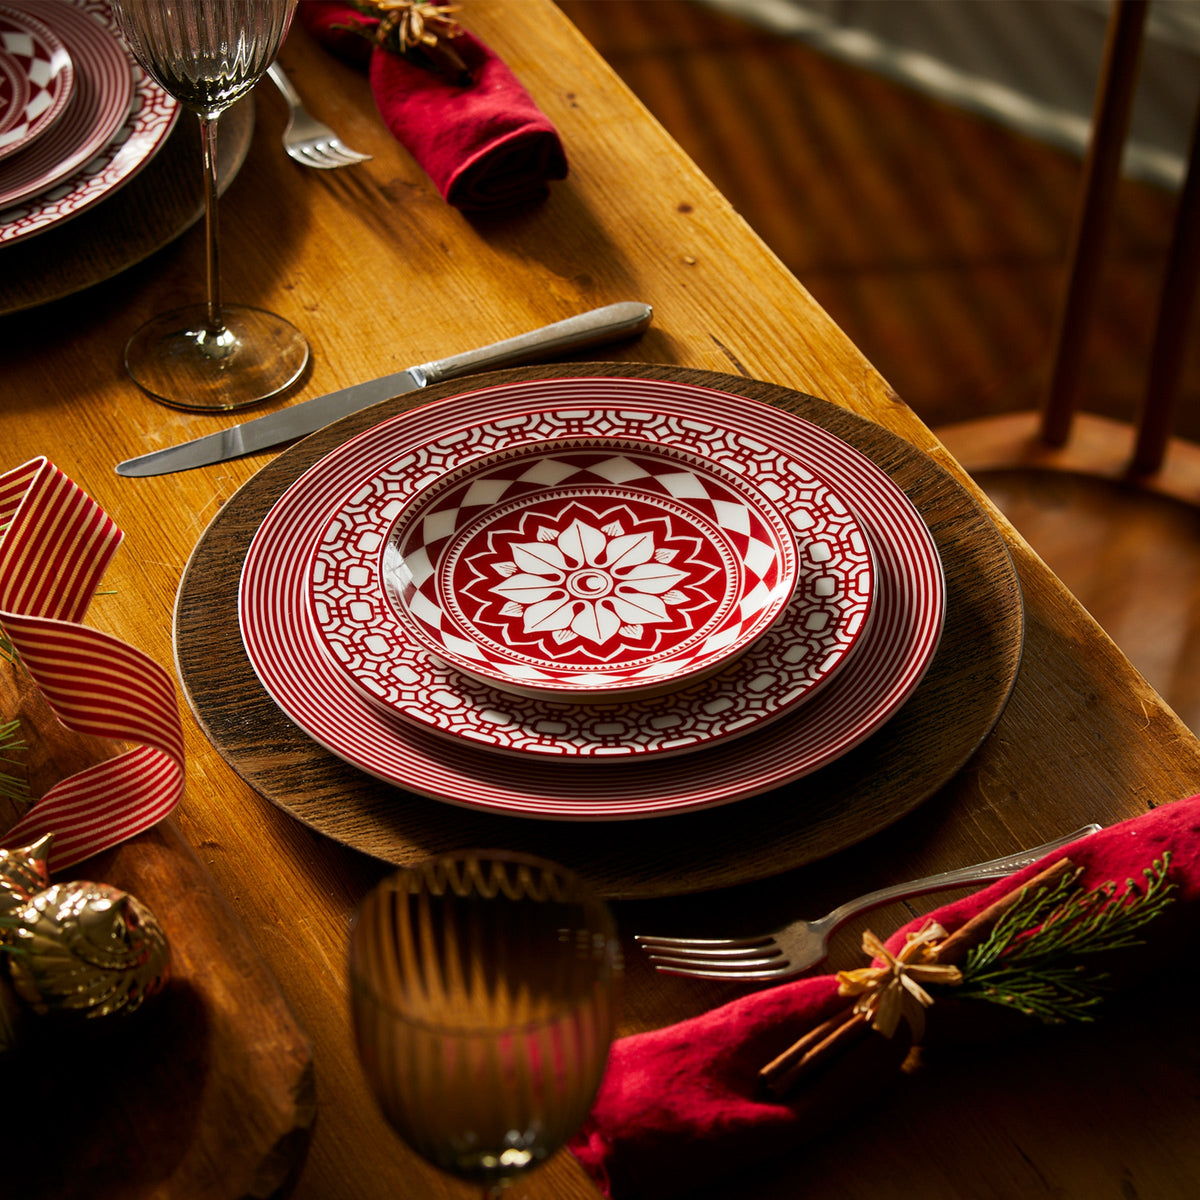 A wooden table set with a Fez Crimson Small Plate by Caskata Artisanal Home, heirloom-quality dinnerware, silverware, a glass, and red napkins, creating an entertaining powerhouse with festive decorations.